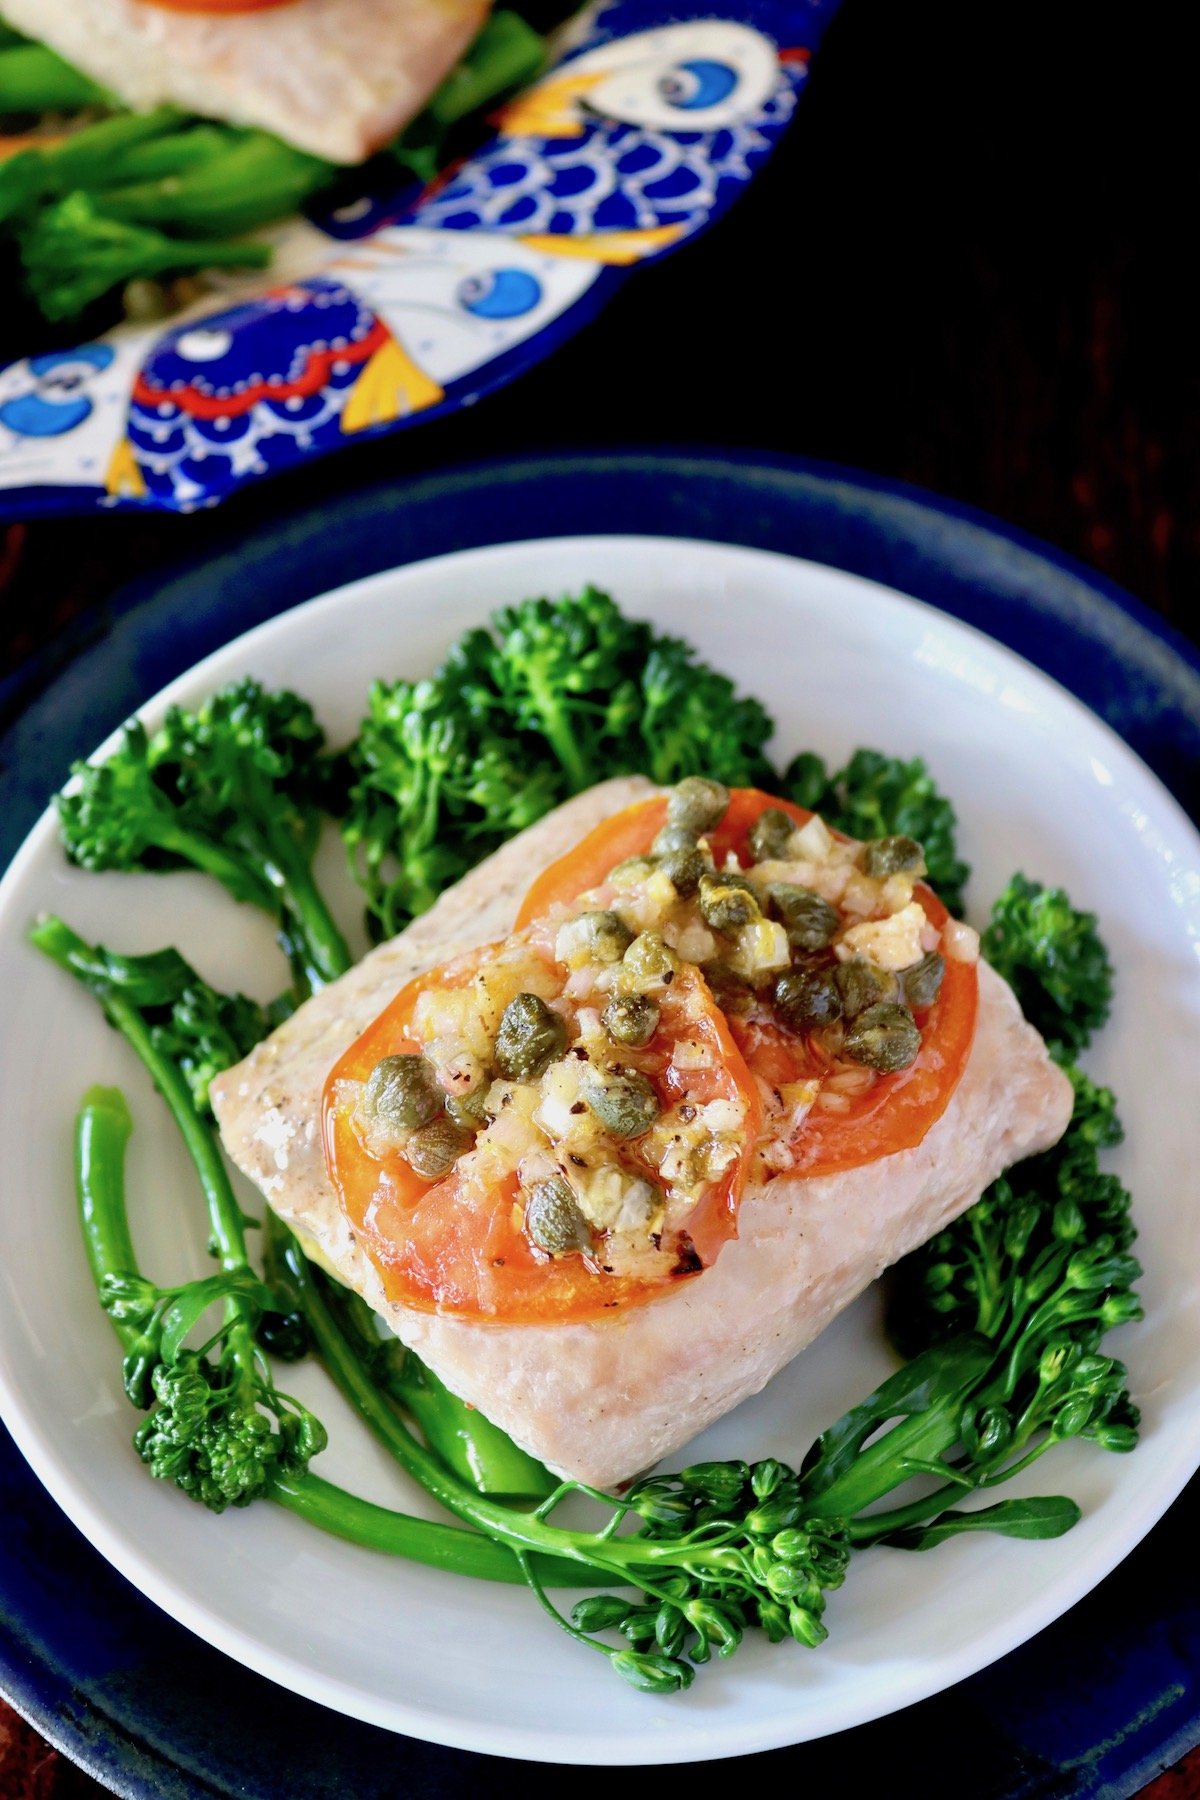 White plate with bright green Broccolini with a Mahi Mahi fillet with tomato slices on top of it.